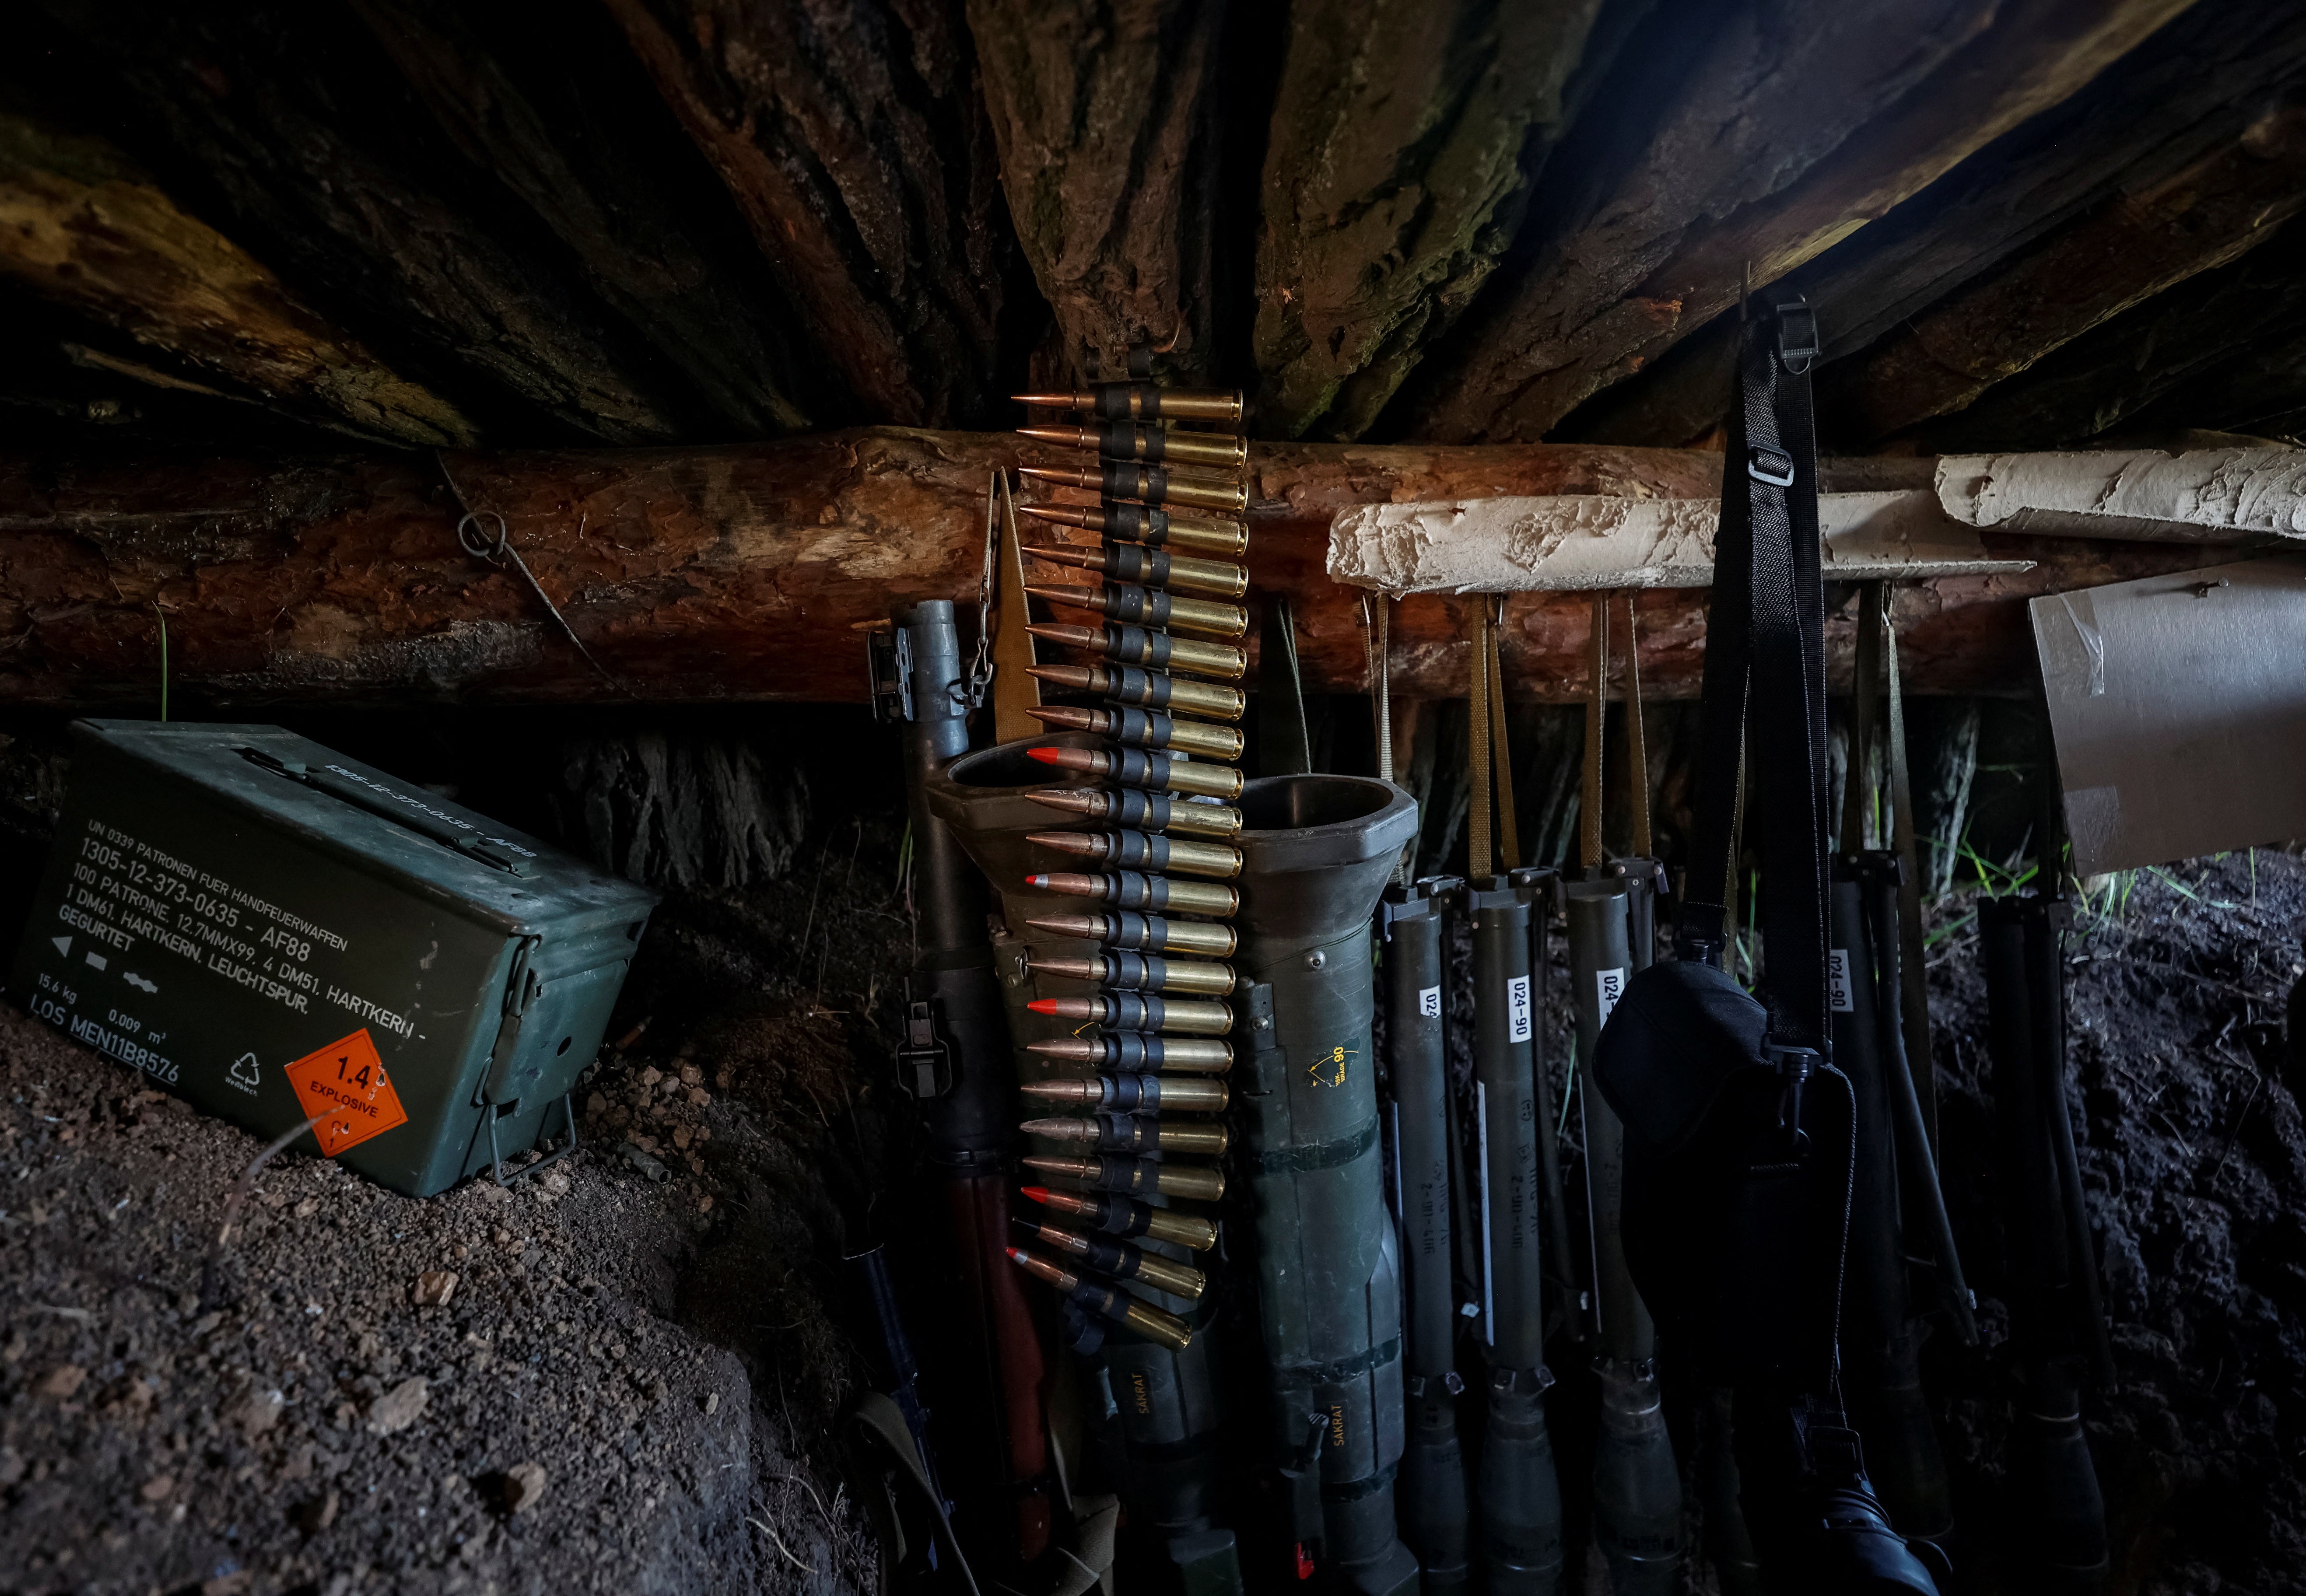 Weapons of Ukrainian service members are seen in a trench at position at a front line, amid Russia's attack on Ukraine